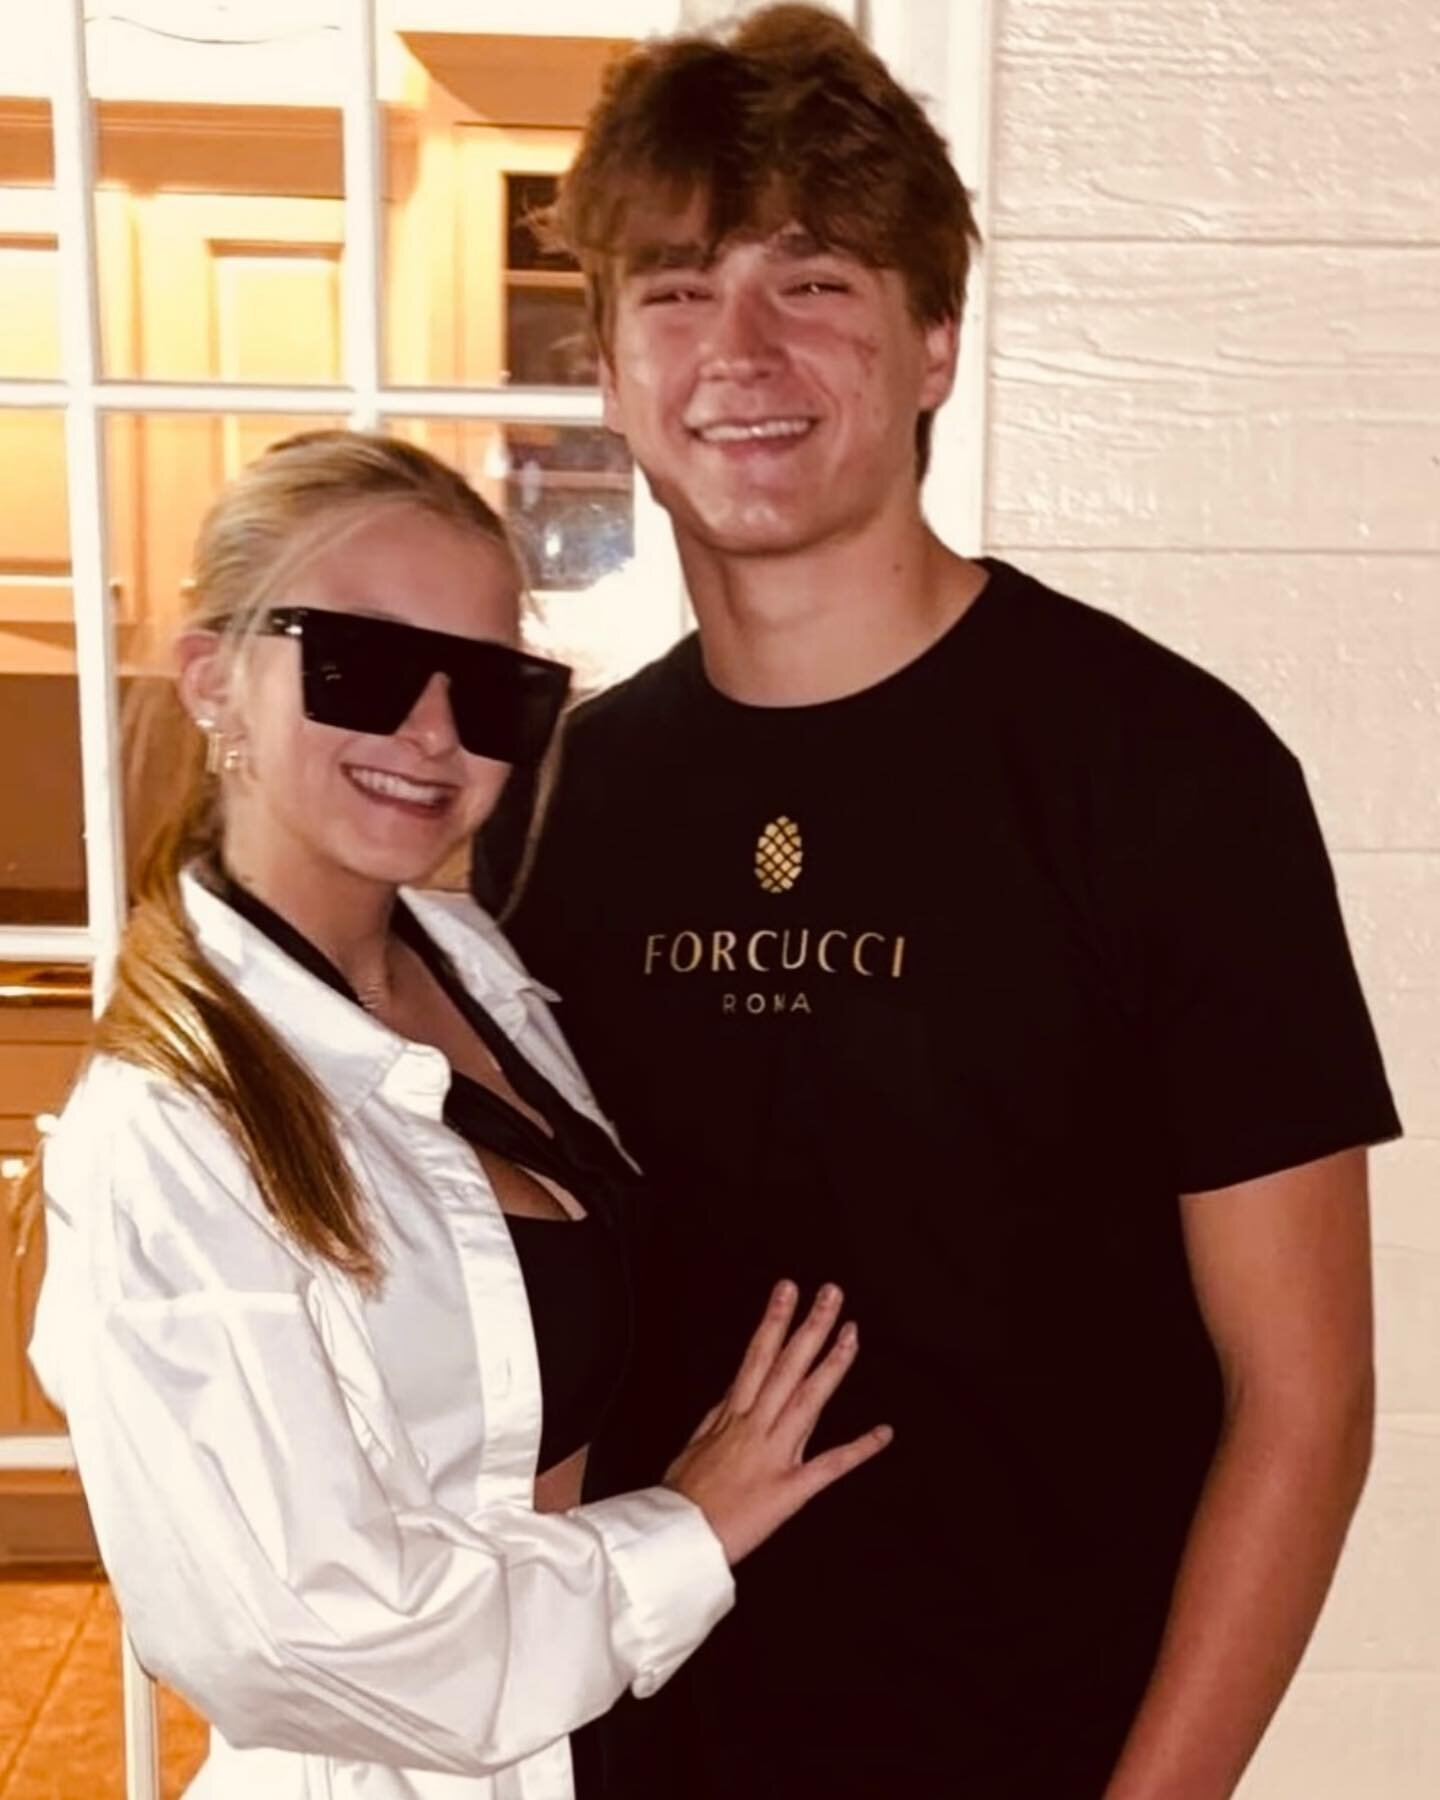 It&rsquo;s not Old Spice, it&rsquo;s the Forcucci Tee @d_roden06 knows what&rsquo;s up. 

#forcucci #streetwear #pigna #JCHS #alpharetta #americanteenager #bigpoppa